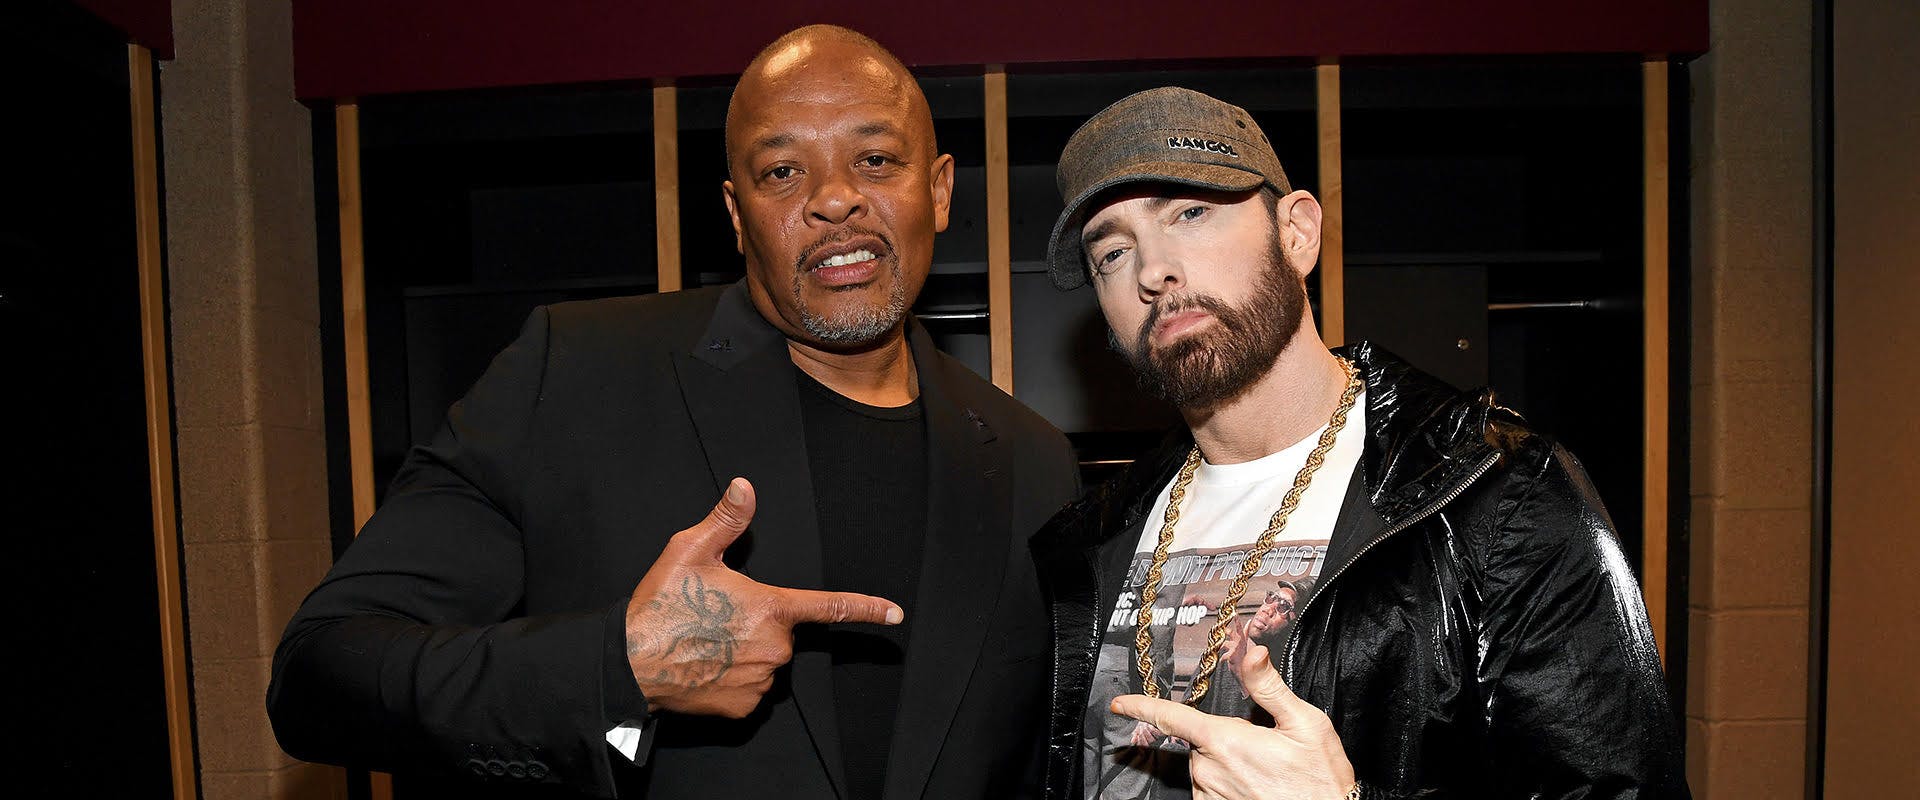 If Eminem, Dr. Dre, and Snoop Dogg in the old rappers had shapeshifting  powers, will they turn back into their old younger selves and have a lot of  fun still like they